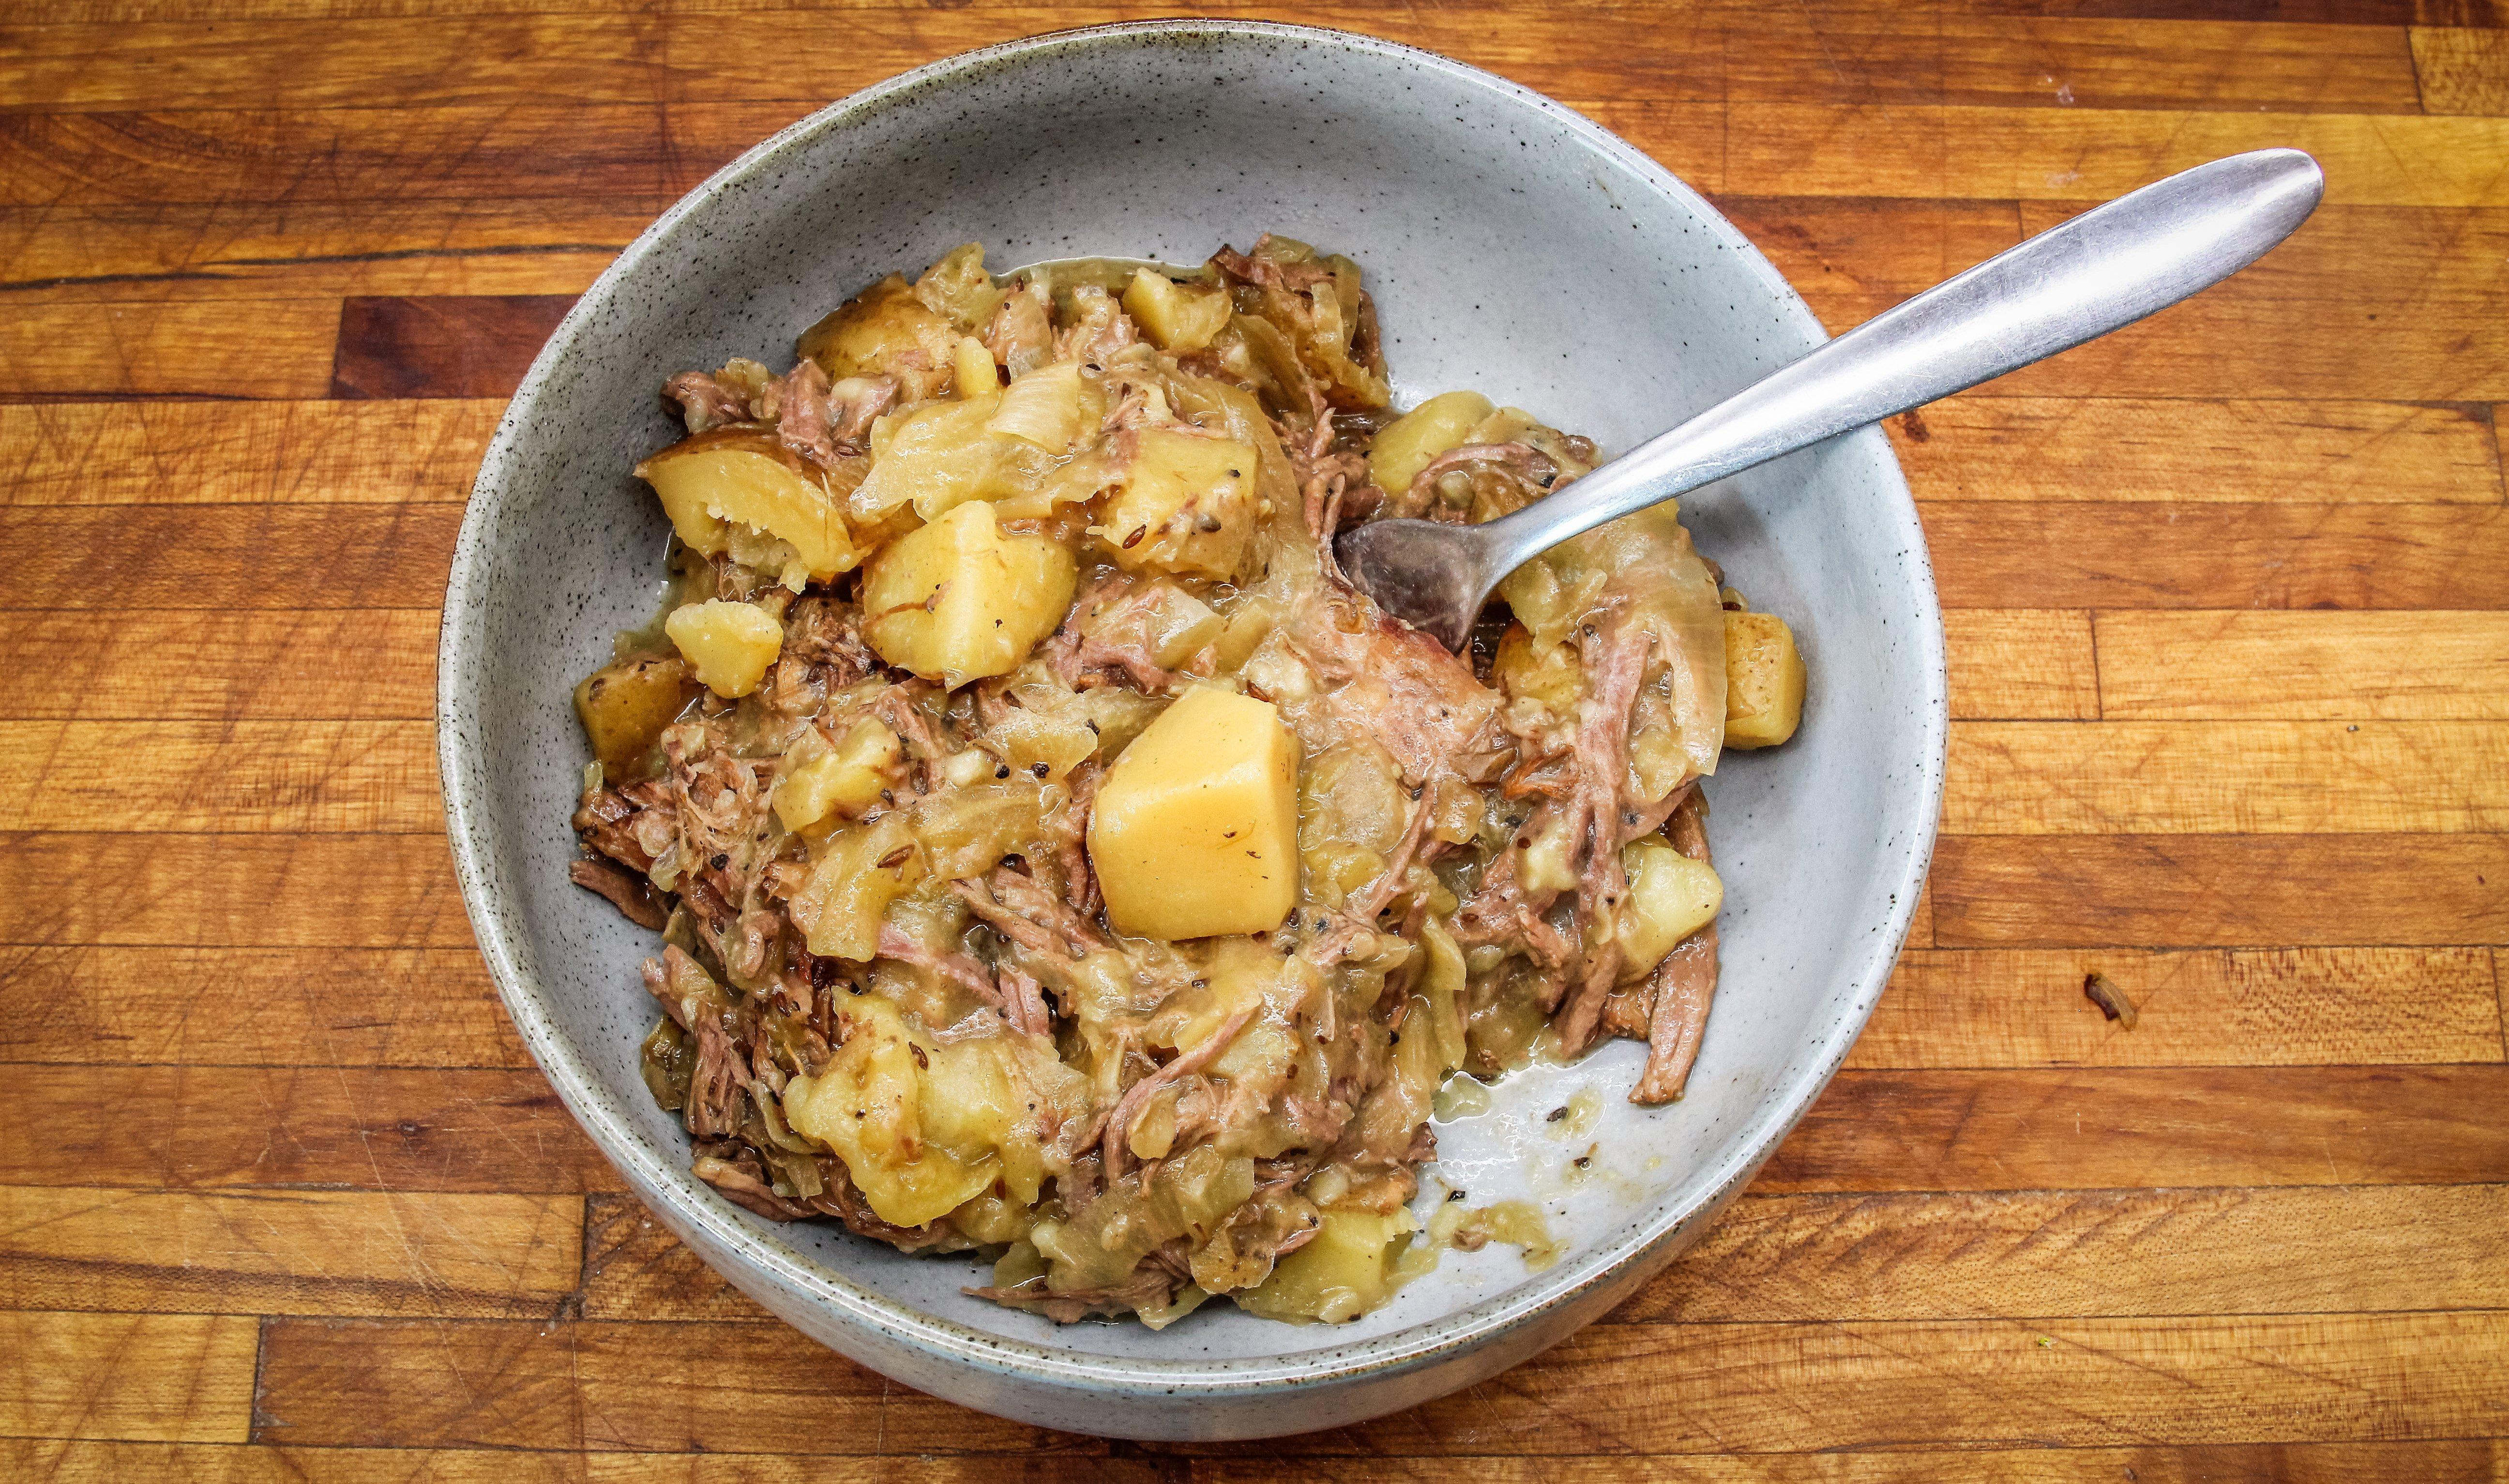 Full of fall-apart tender venison, tart and tangy sauerkraut and hearty potatoes, all in a rich gravy, this is a pot roast everyone will love.